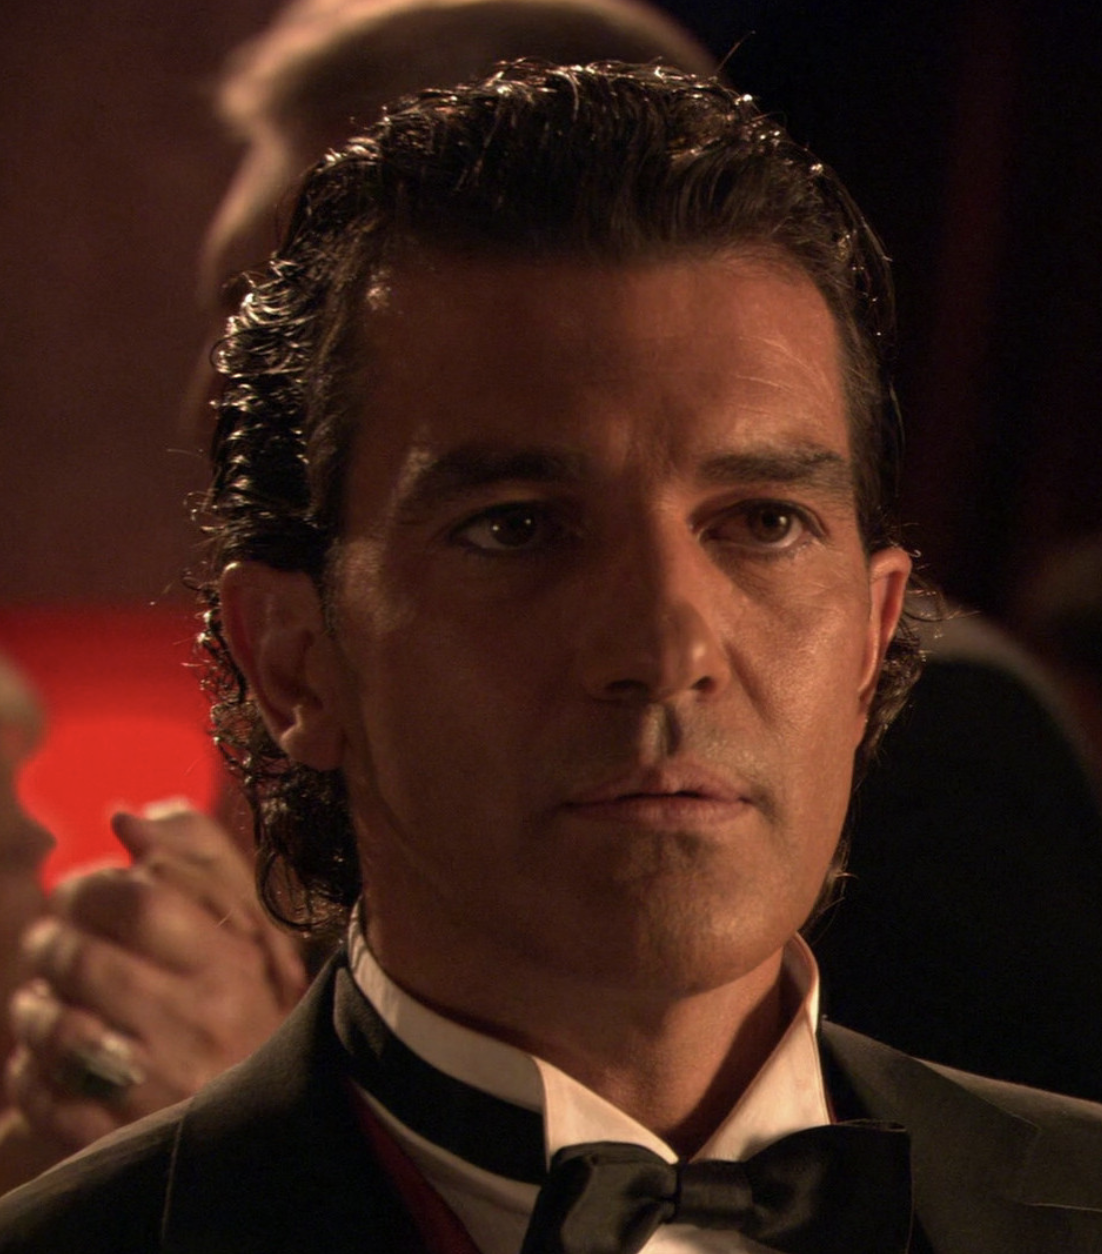 Gregorio from Spy Kids looking suave